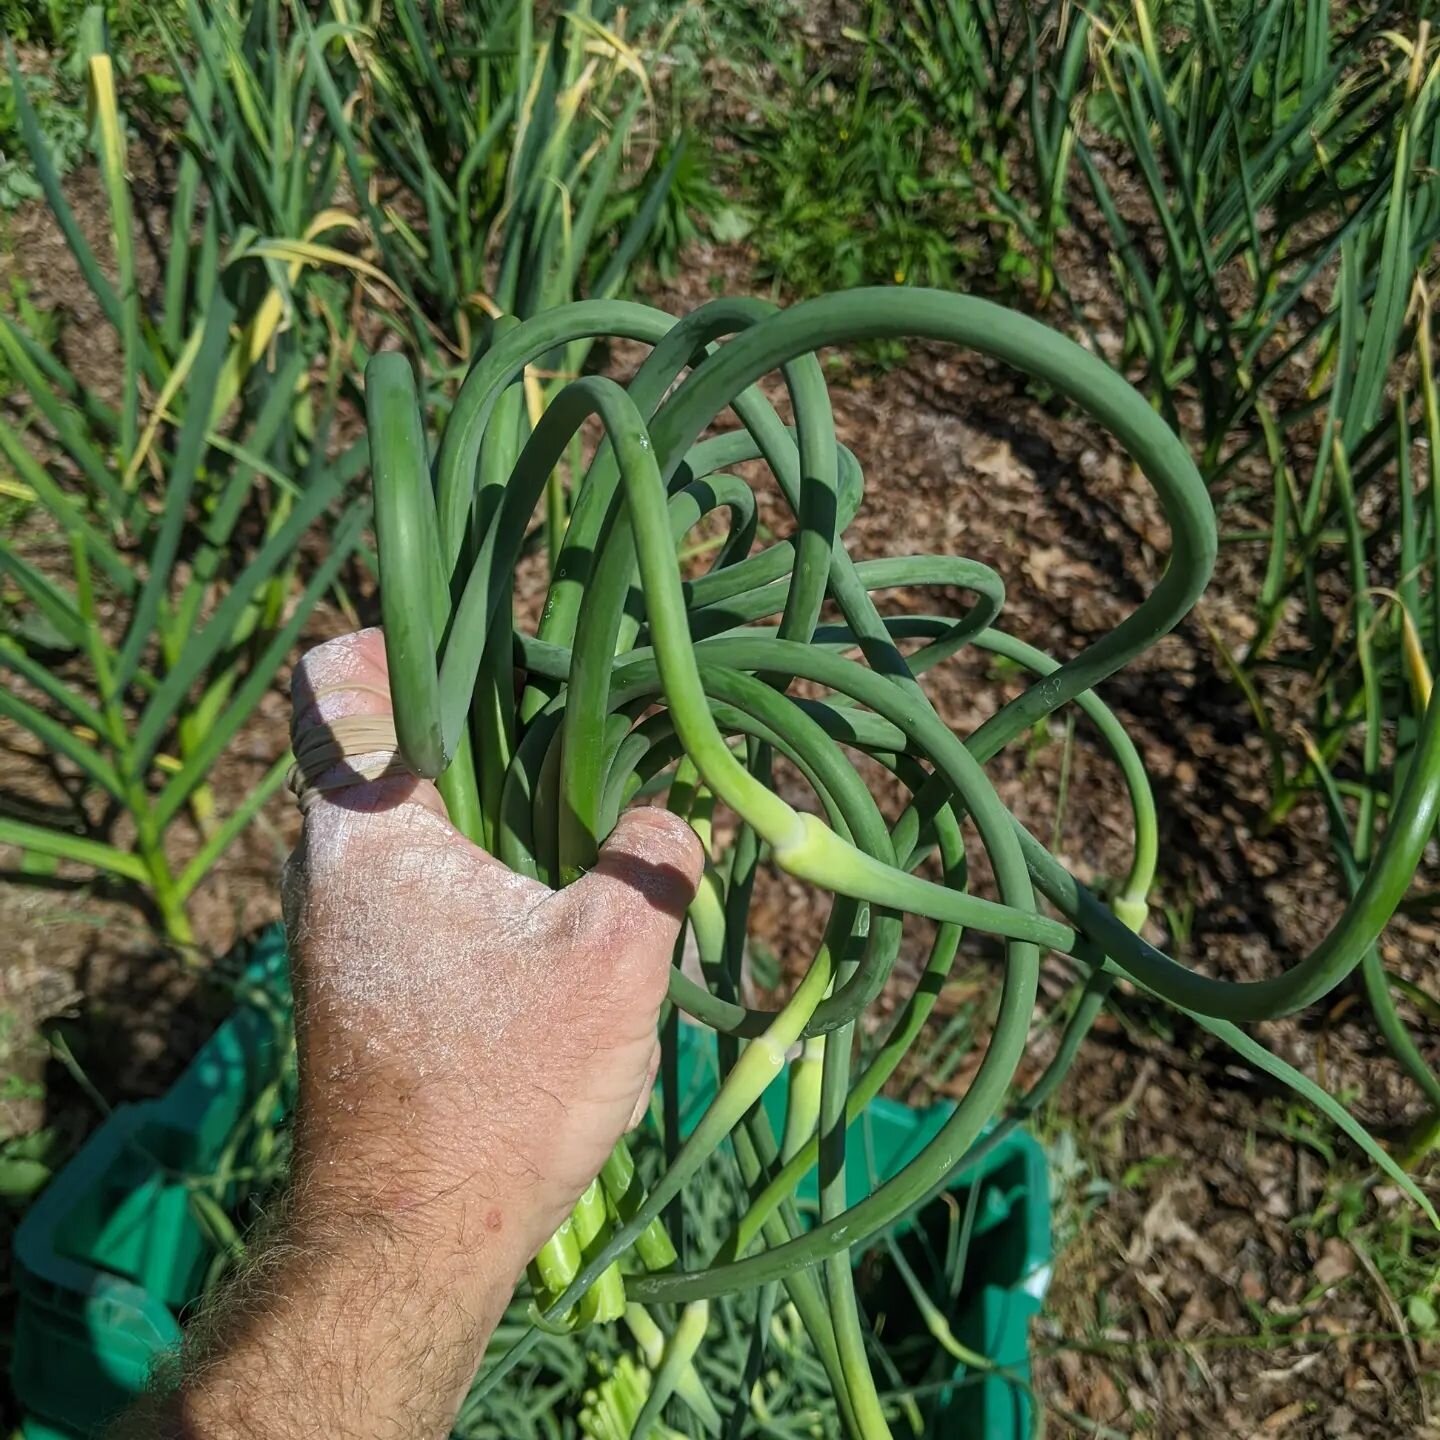 Garlic scapes now available on Market Mobile and at the Armory Farmers Market! Also ranunculus, strawberries,  plants, etc. I added a second side to new plant labels with farm contact info.